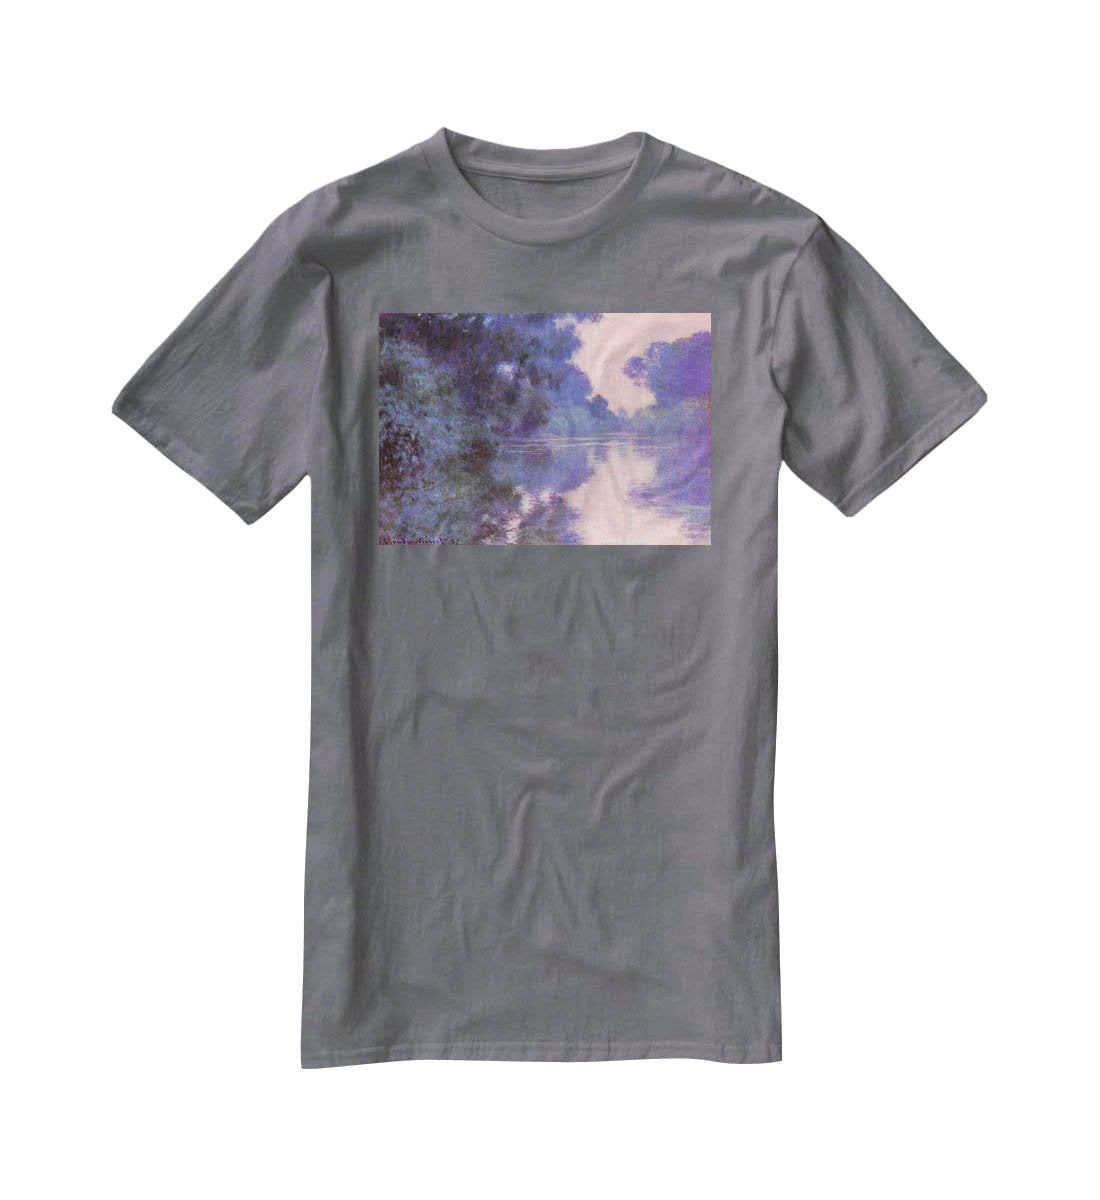 Seine arm at Giverny by Monet T-Shirt - Canvas Art Rocks - 3